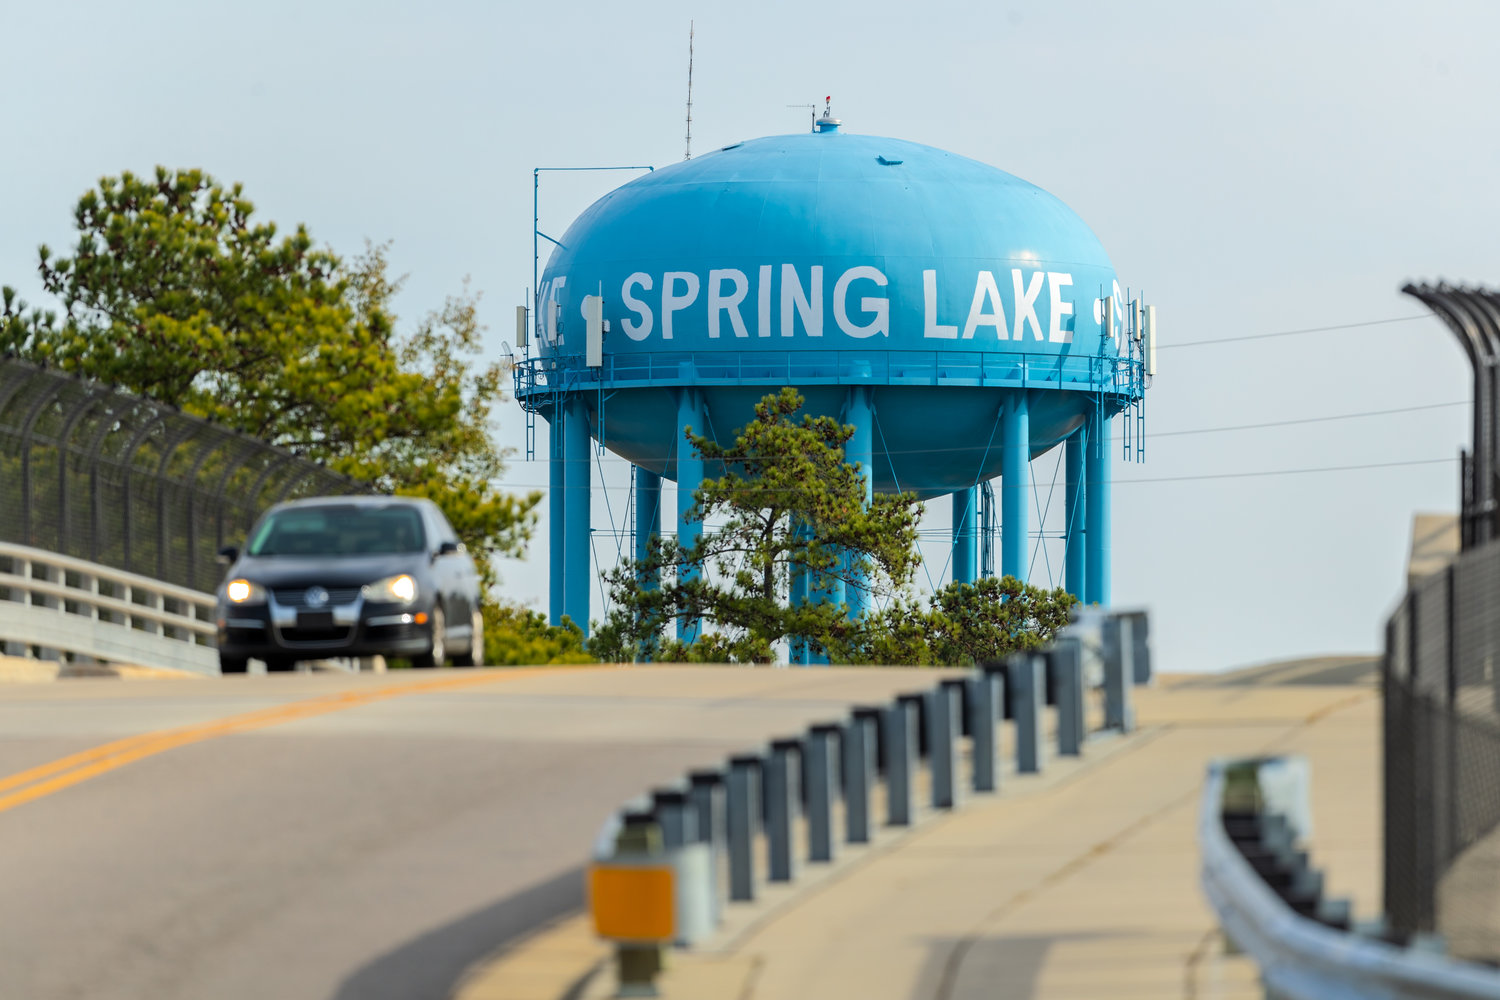 The Spring Lake Board of Aldermen on Monday considered whether to release minutes of closed-session meetings on economic development.